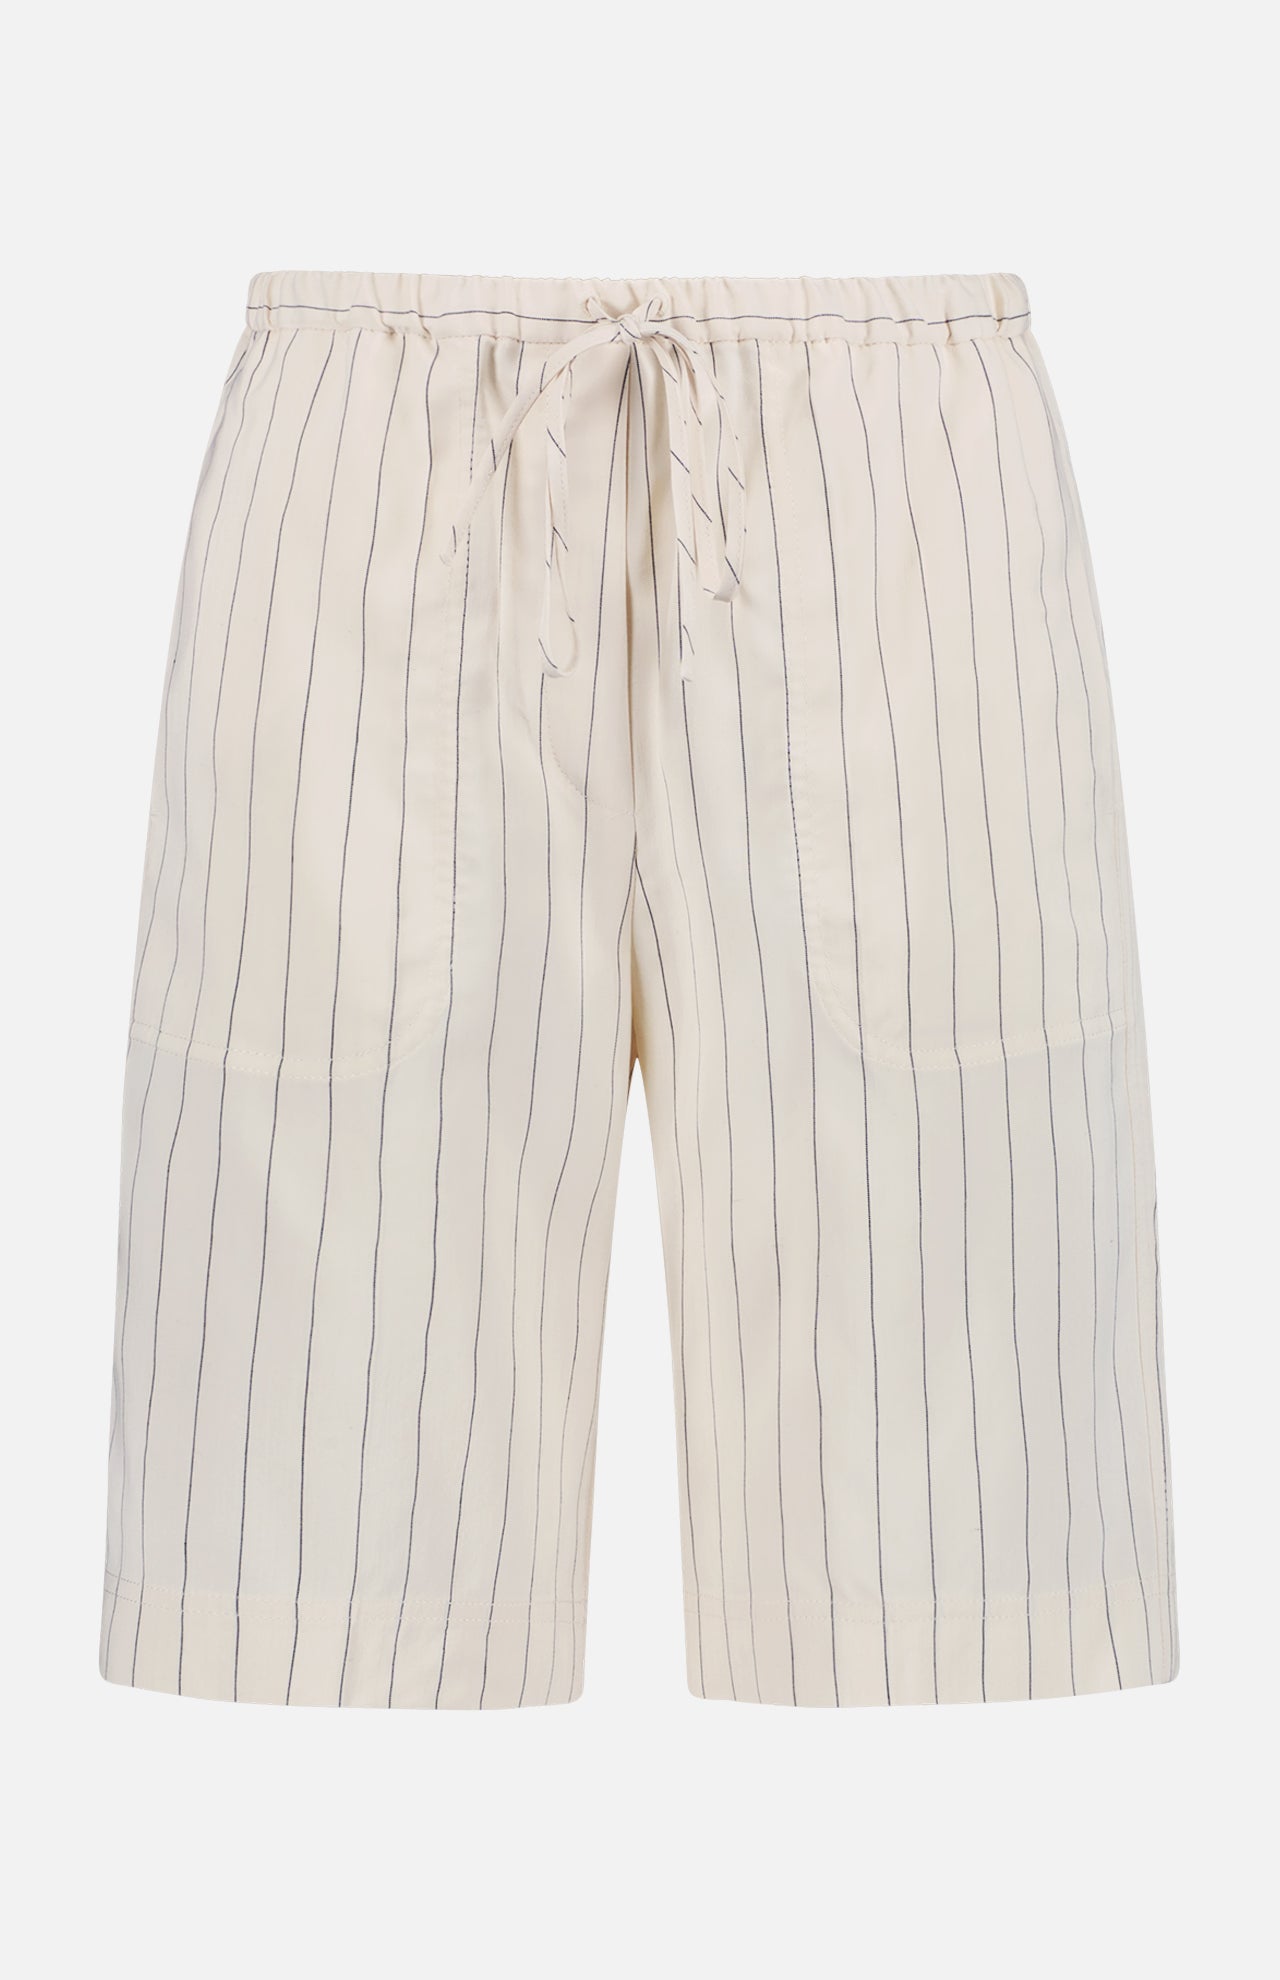 Relaxed Pinstriped Shorts (7406479179891)